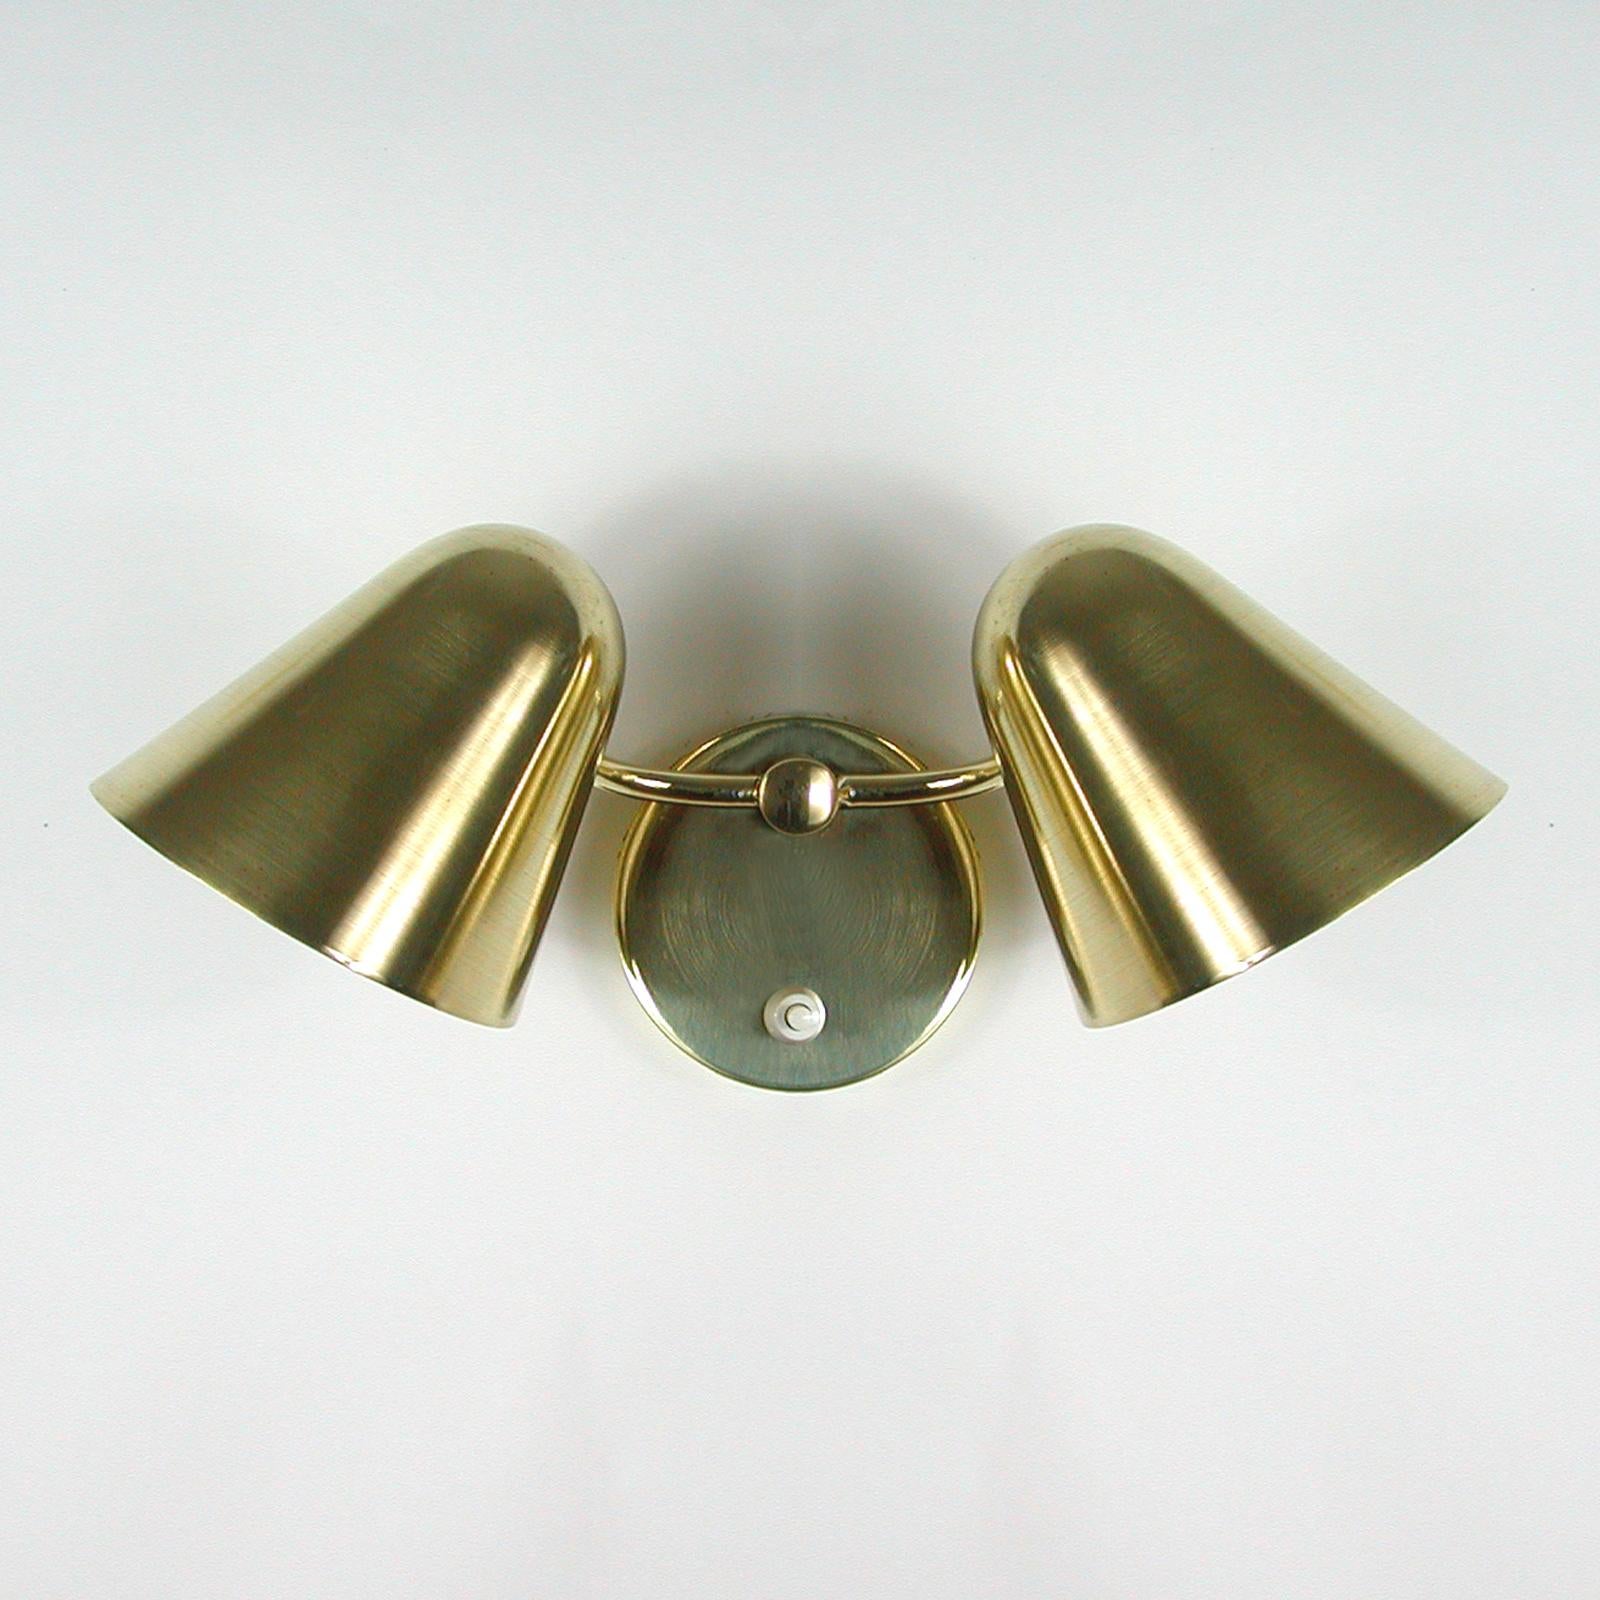 This rare double cone Cocotte wall light was designed by Jacques Biny in the 1950s. It features two adjustable brass lamp shades and a brass back plate. Both shades rotate in any direction you wish. 

Rewired for use in US and any other country of